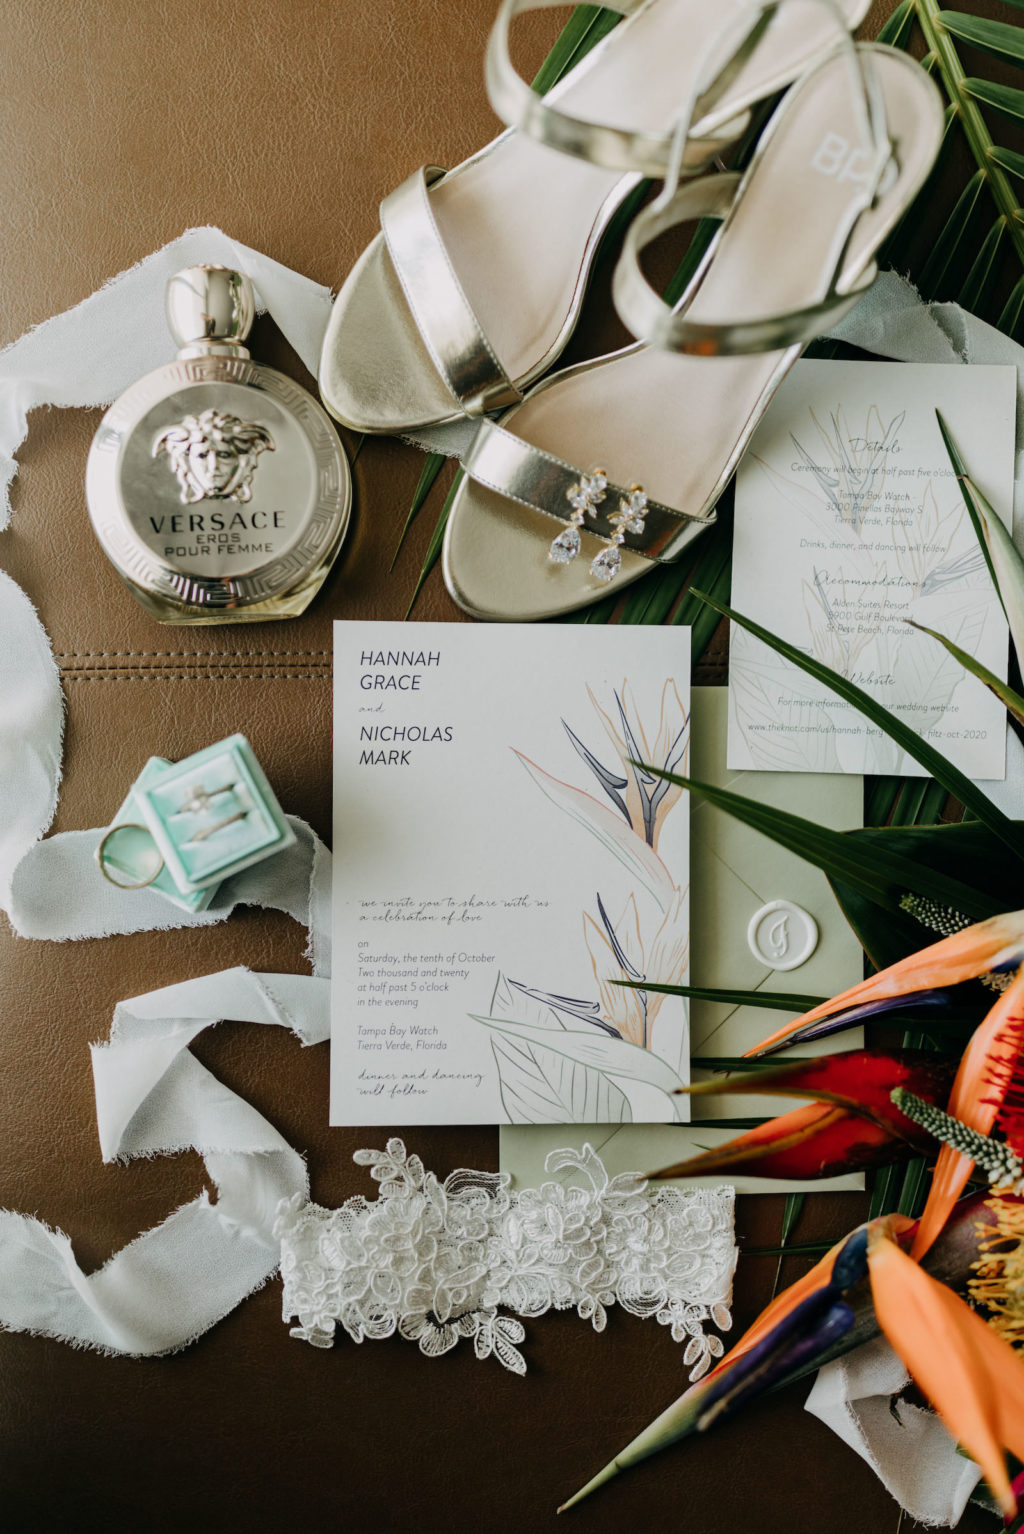 Tropical Elegant Wedding Invitation, Sage Green, White Invitation with Tropical Floral Design, Silver Strappy Wedding Shoes, Versace Perfume Bottle, Wedding Rings in Mint Green Box | Tampa Bay Wedding Photographer Amber McWhorter Photography